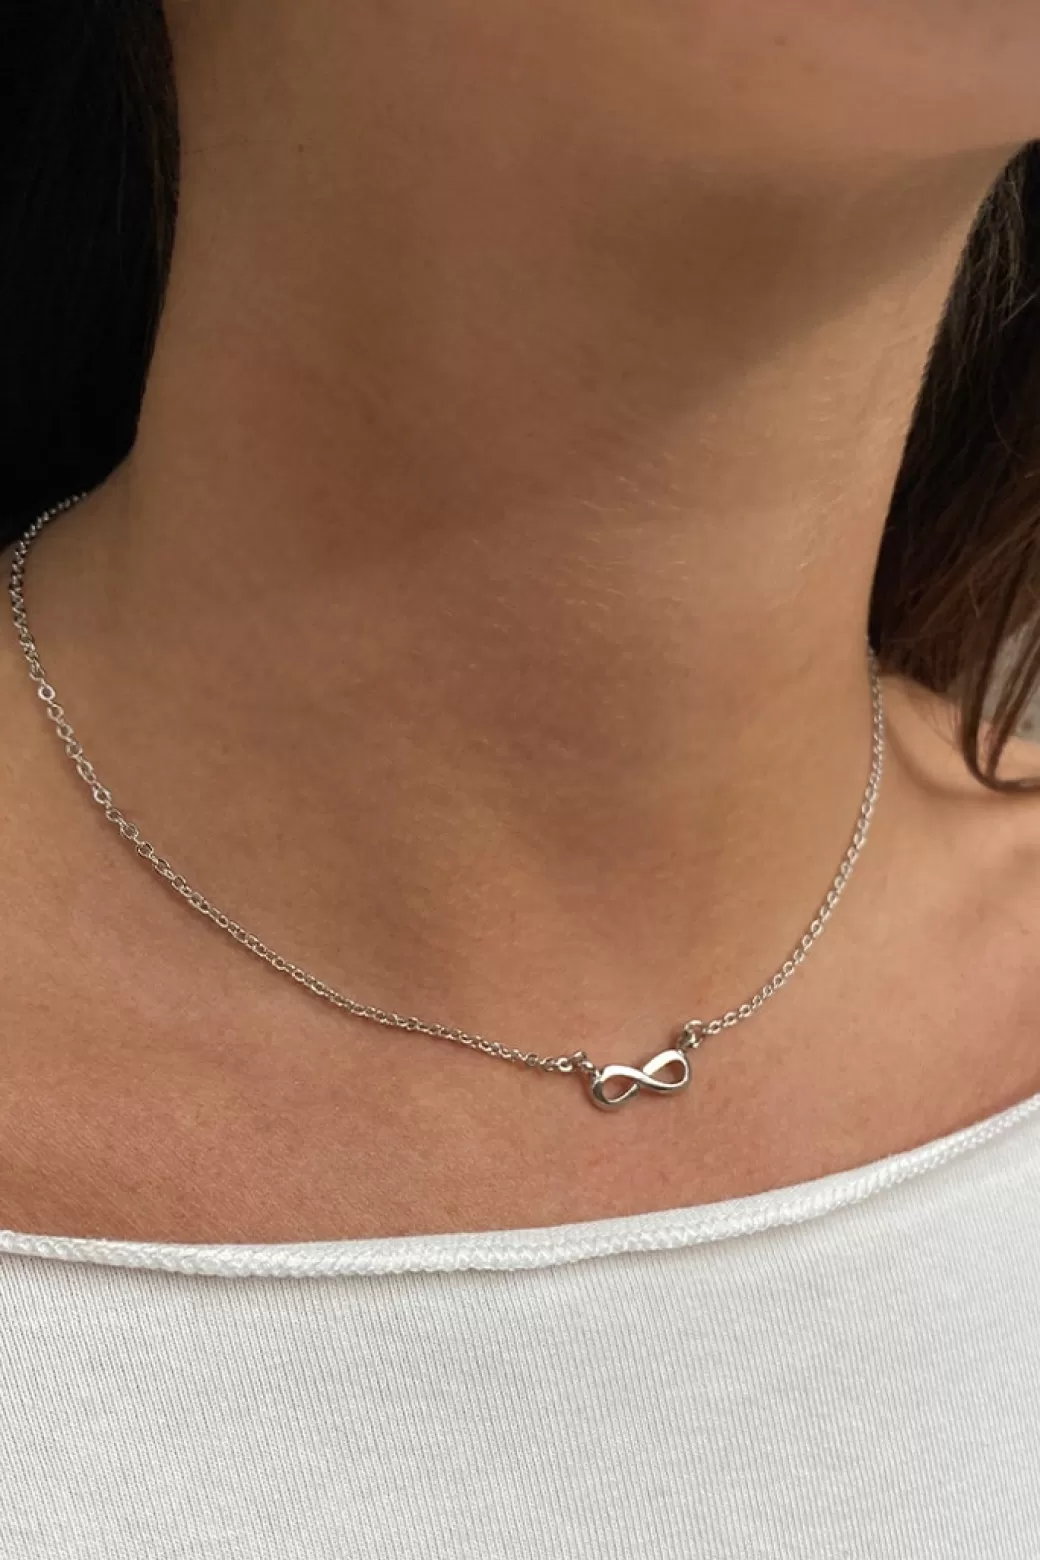 Sale Infinity necklace Accessories